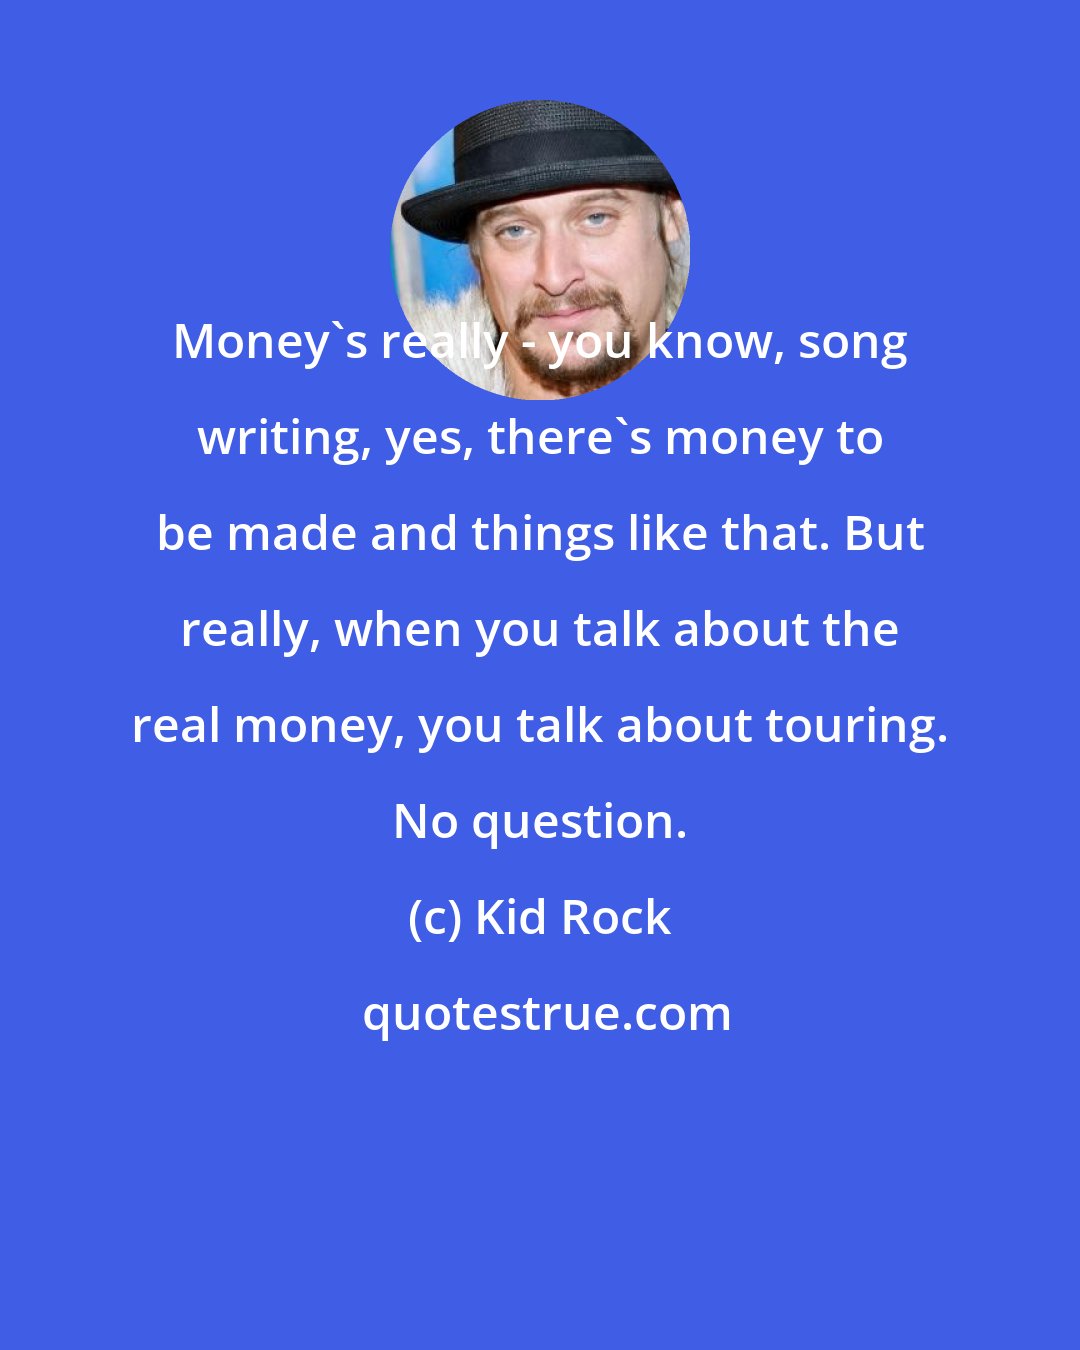 Kid Rock: Money's really - you know, song writing, yes, there's money to be made and things like that. But really, when you talk about the real money, you talk about touring. No question.